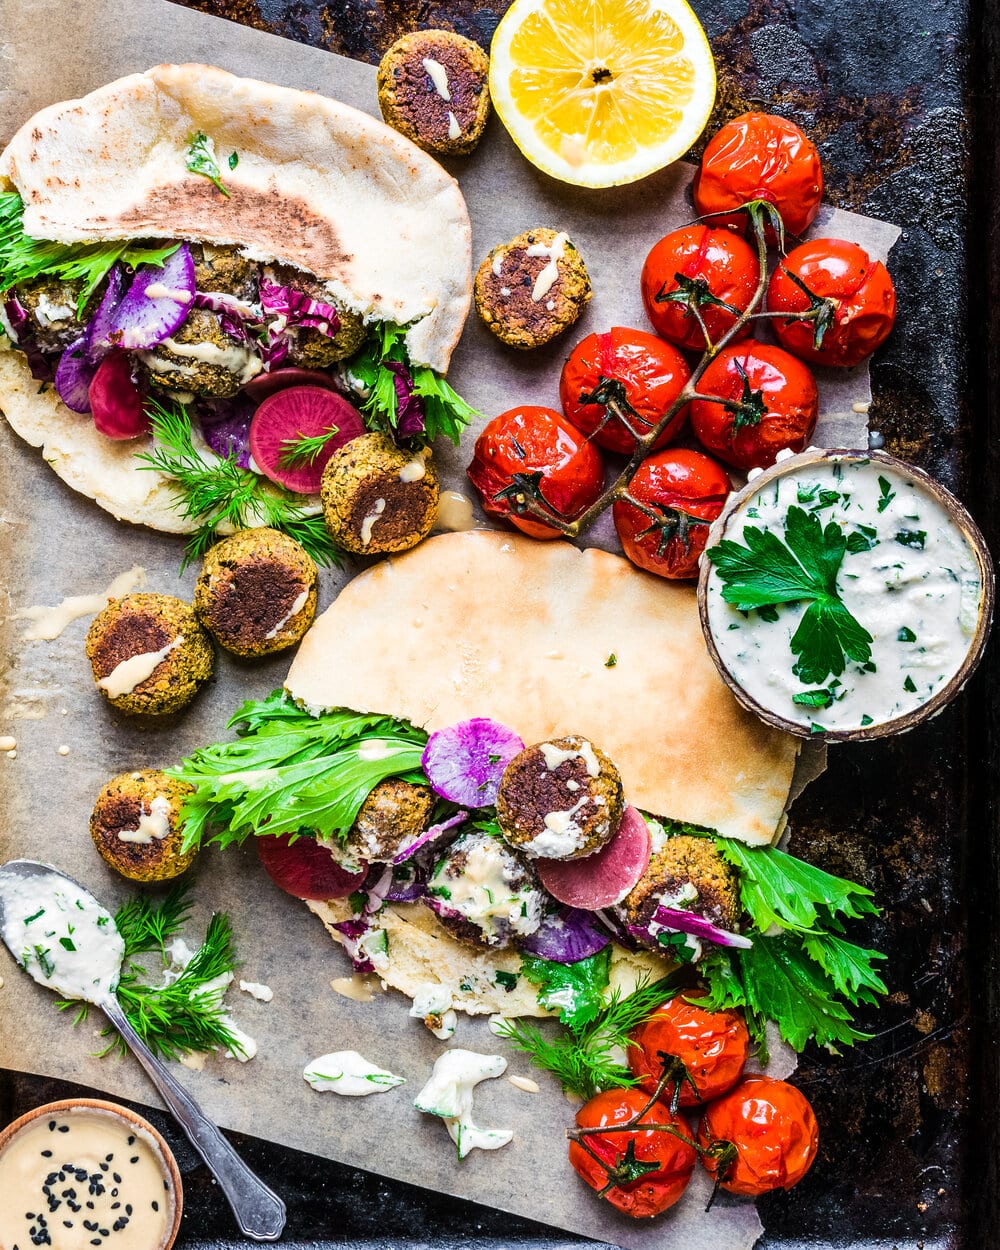 Falafel, tomatoes, pita bread, tzatziki and herbs on parchment paper.